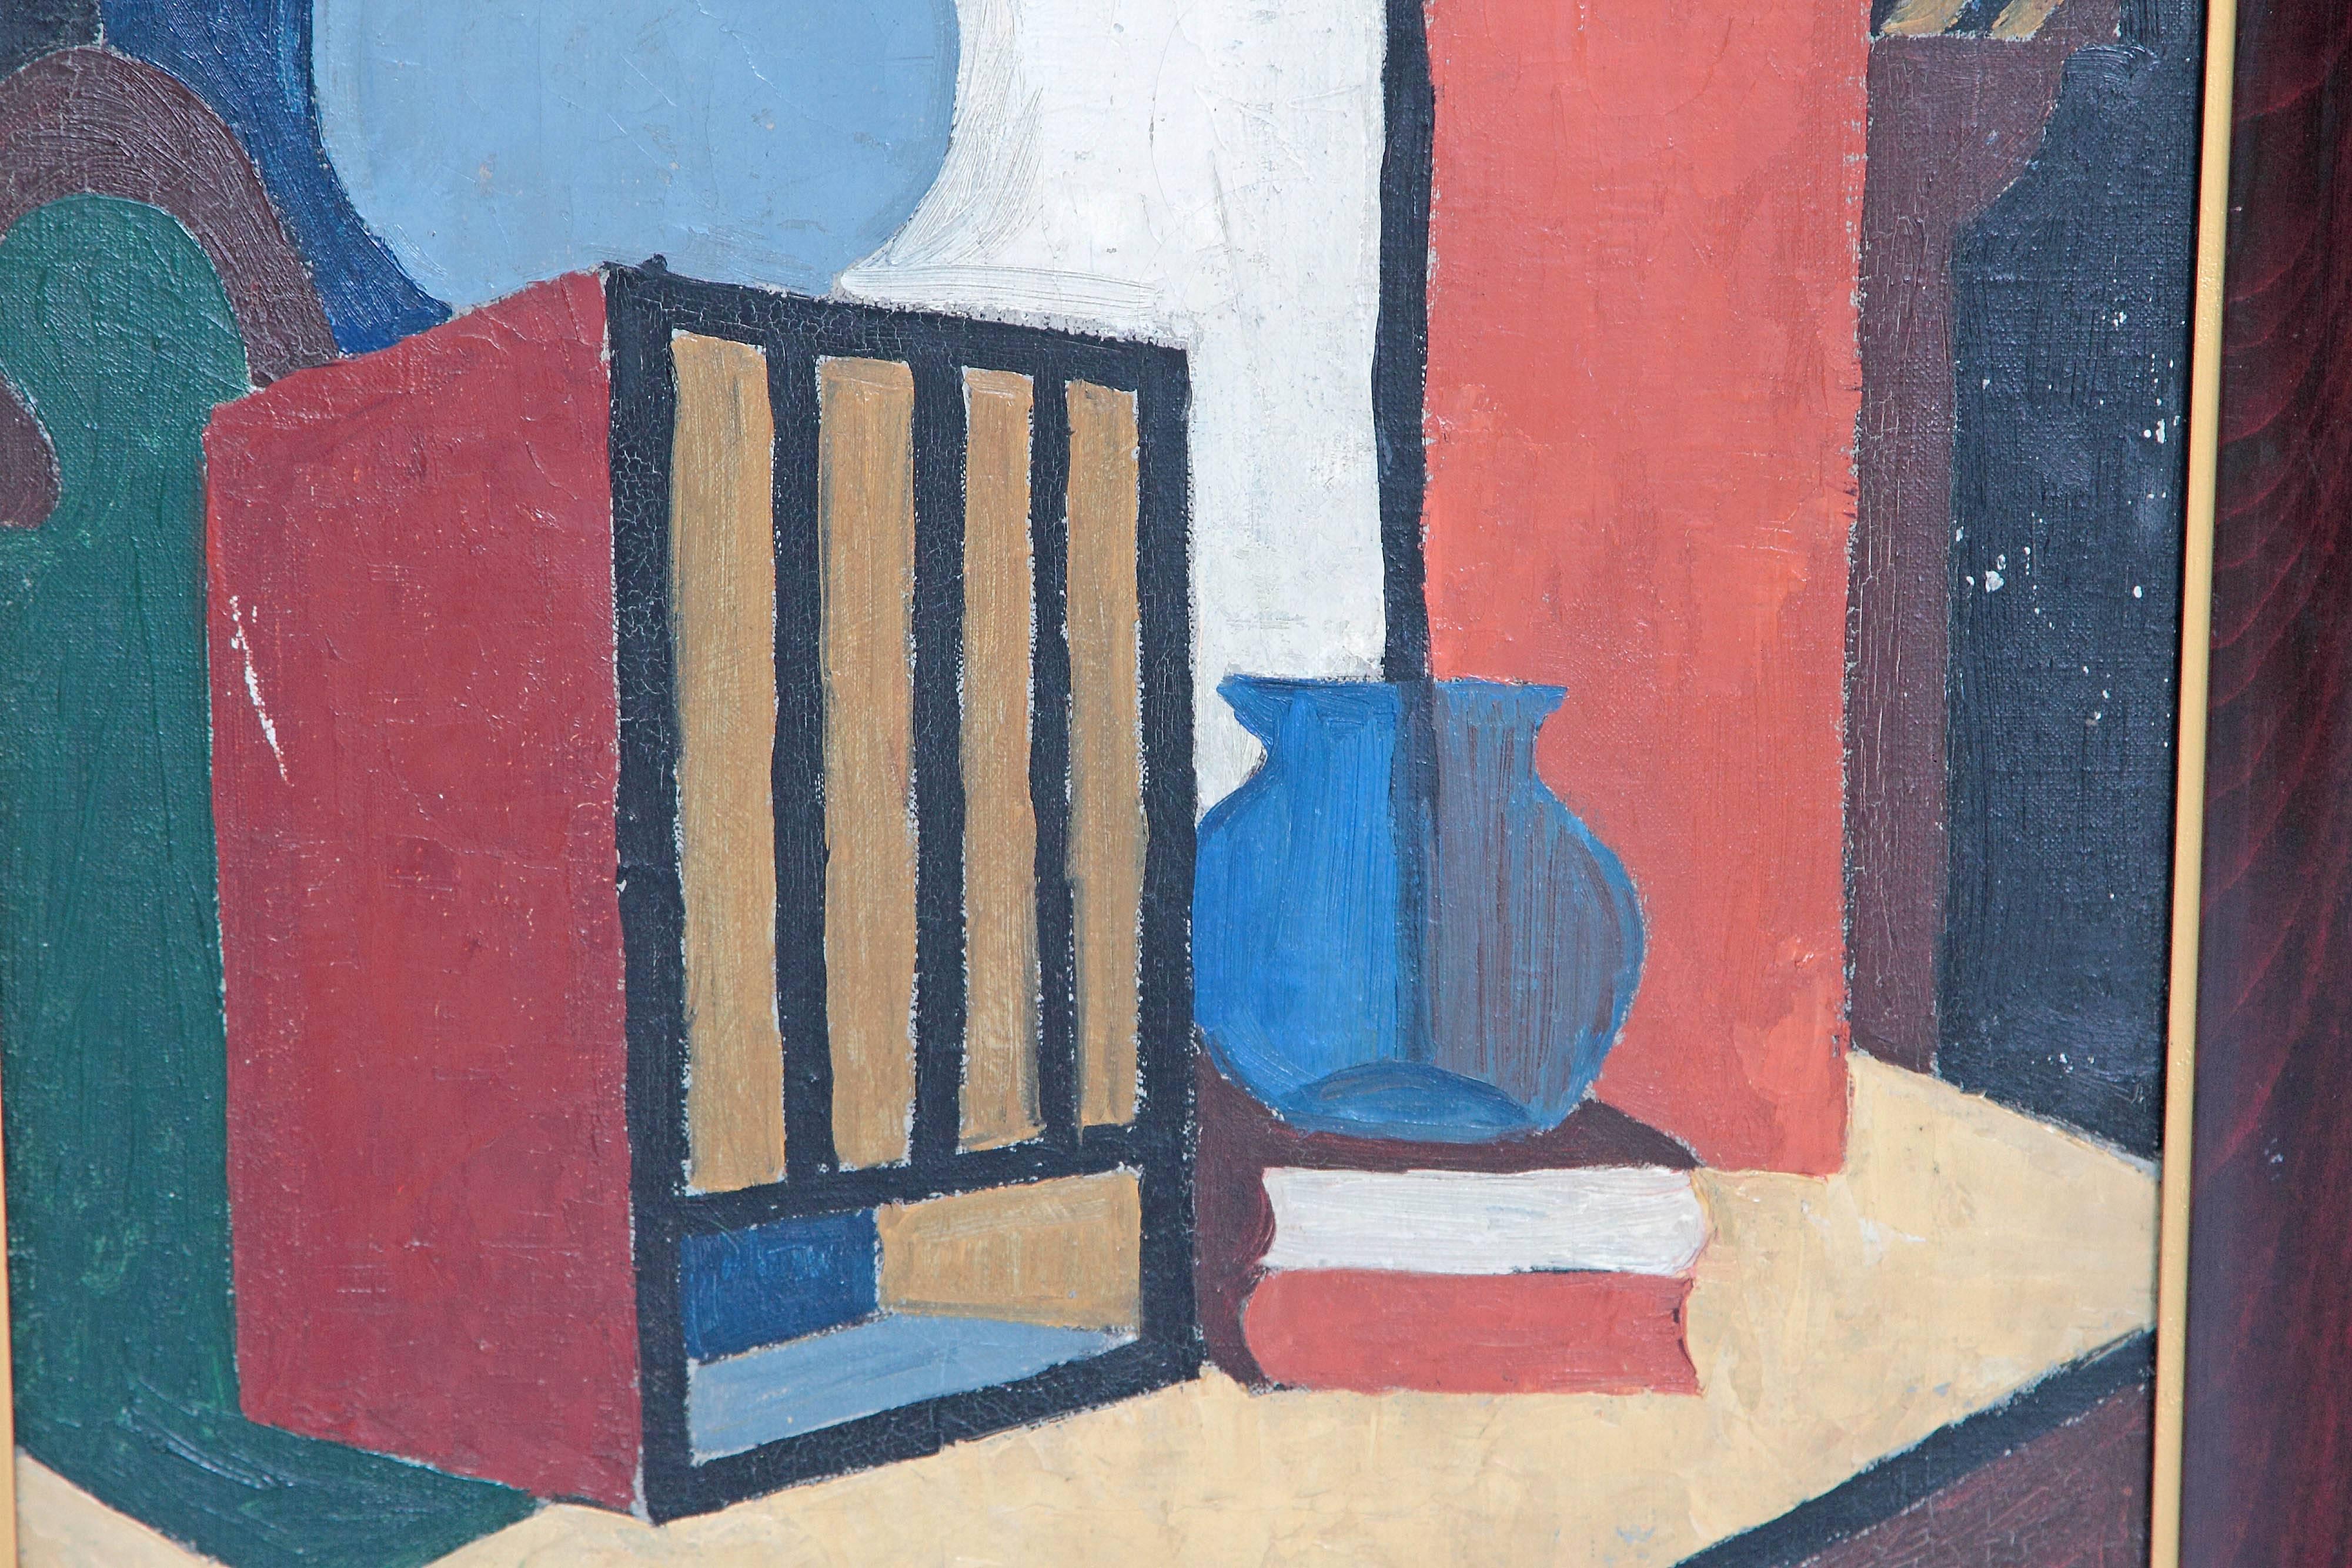 Hand-Painted 20th Century American Abstract Still Life by Flora Scofield, Oil on Canvas